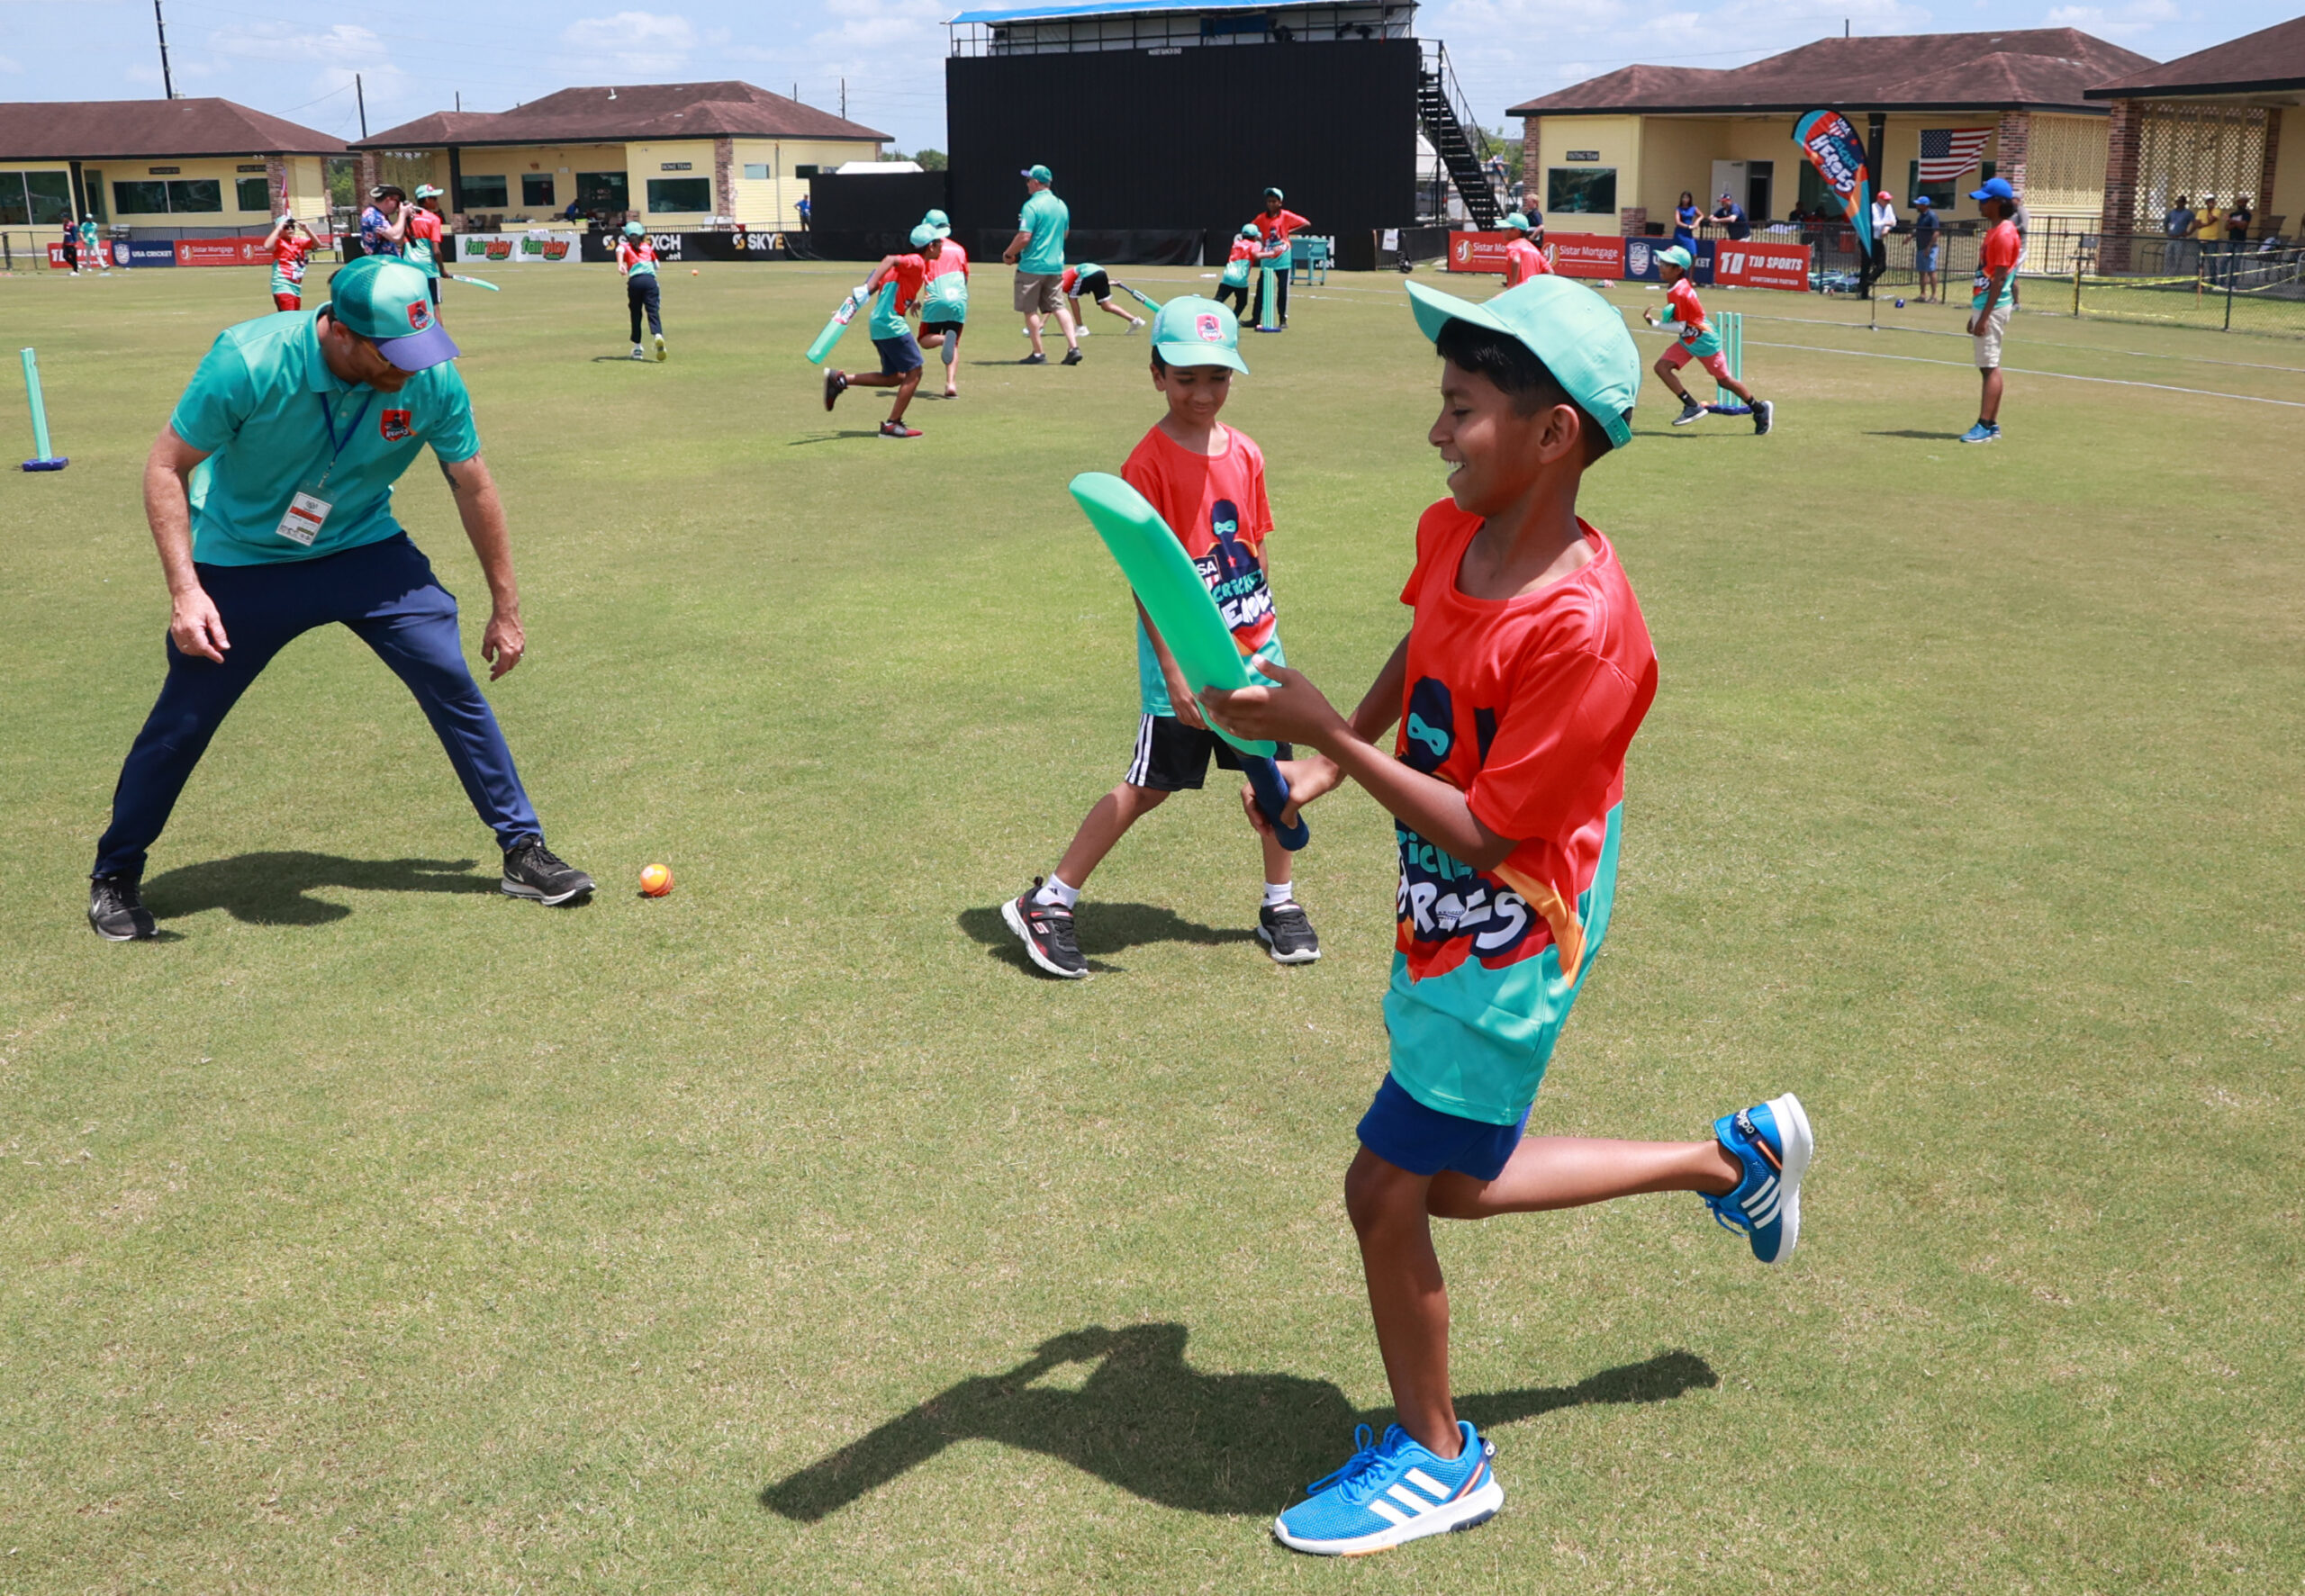 APPLY NOW USA CRICKET TO APPOINT ZONAL LEADS FOR ‘CRICKET HEROES’ PROGRAM